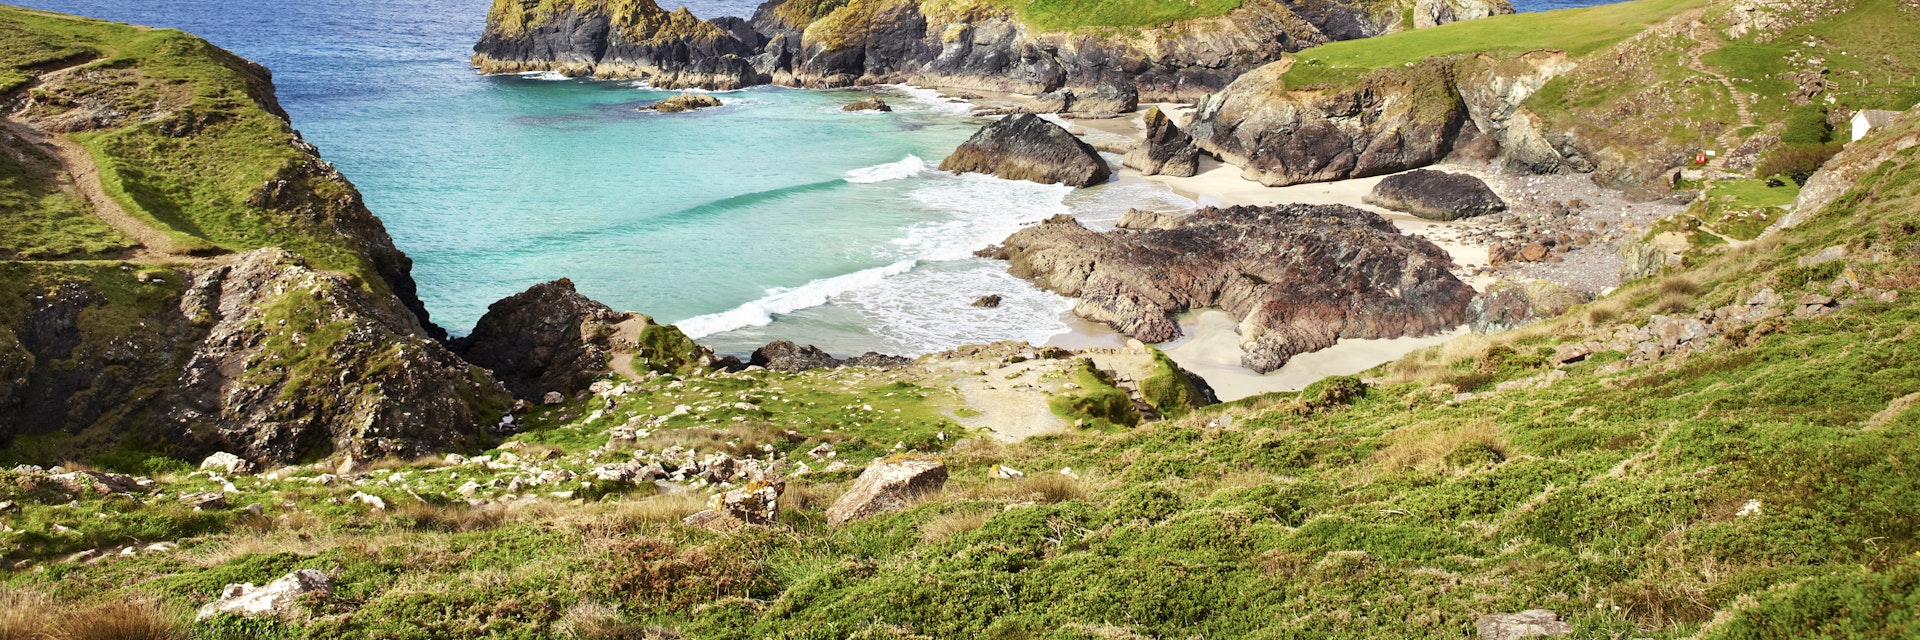 Overview of Kynance Cove on Lizard Peninsula.
Lonely Planet Traveller Magazine, Issue 32, Cornwall, Perfect trip